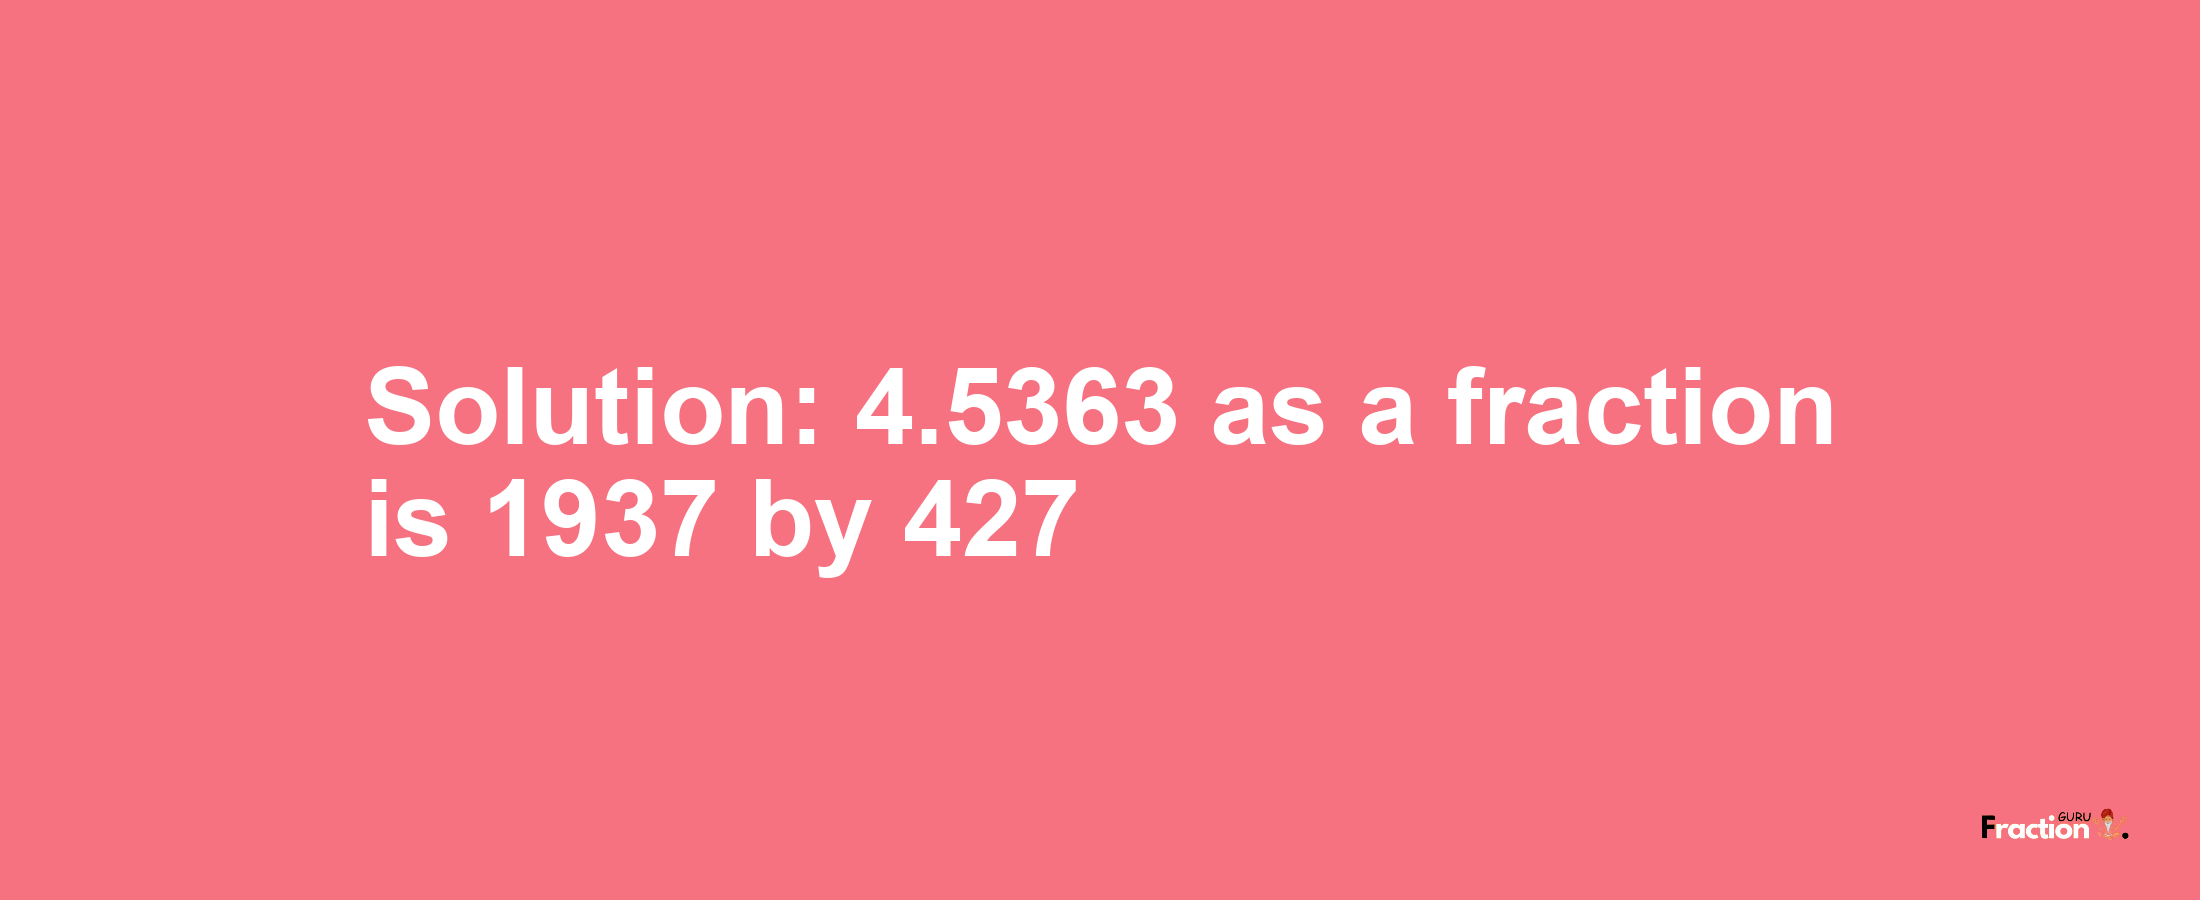 Solution:4.5363 as a fraction is 1937/427